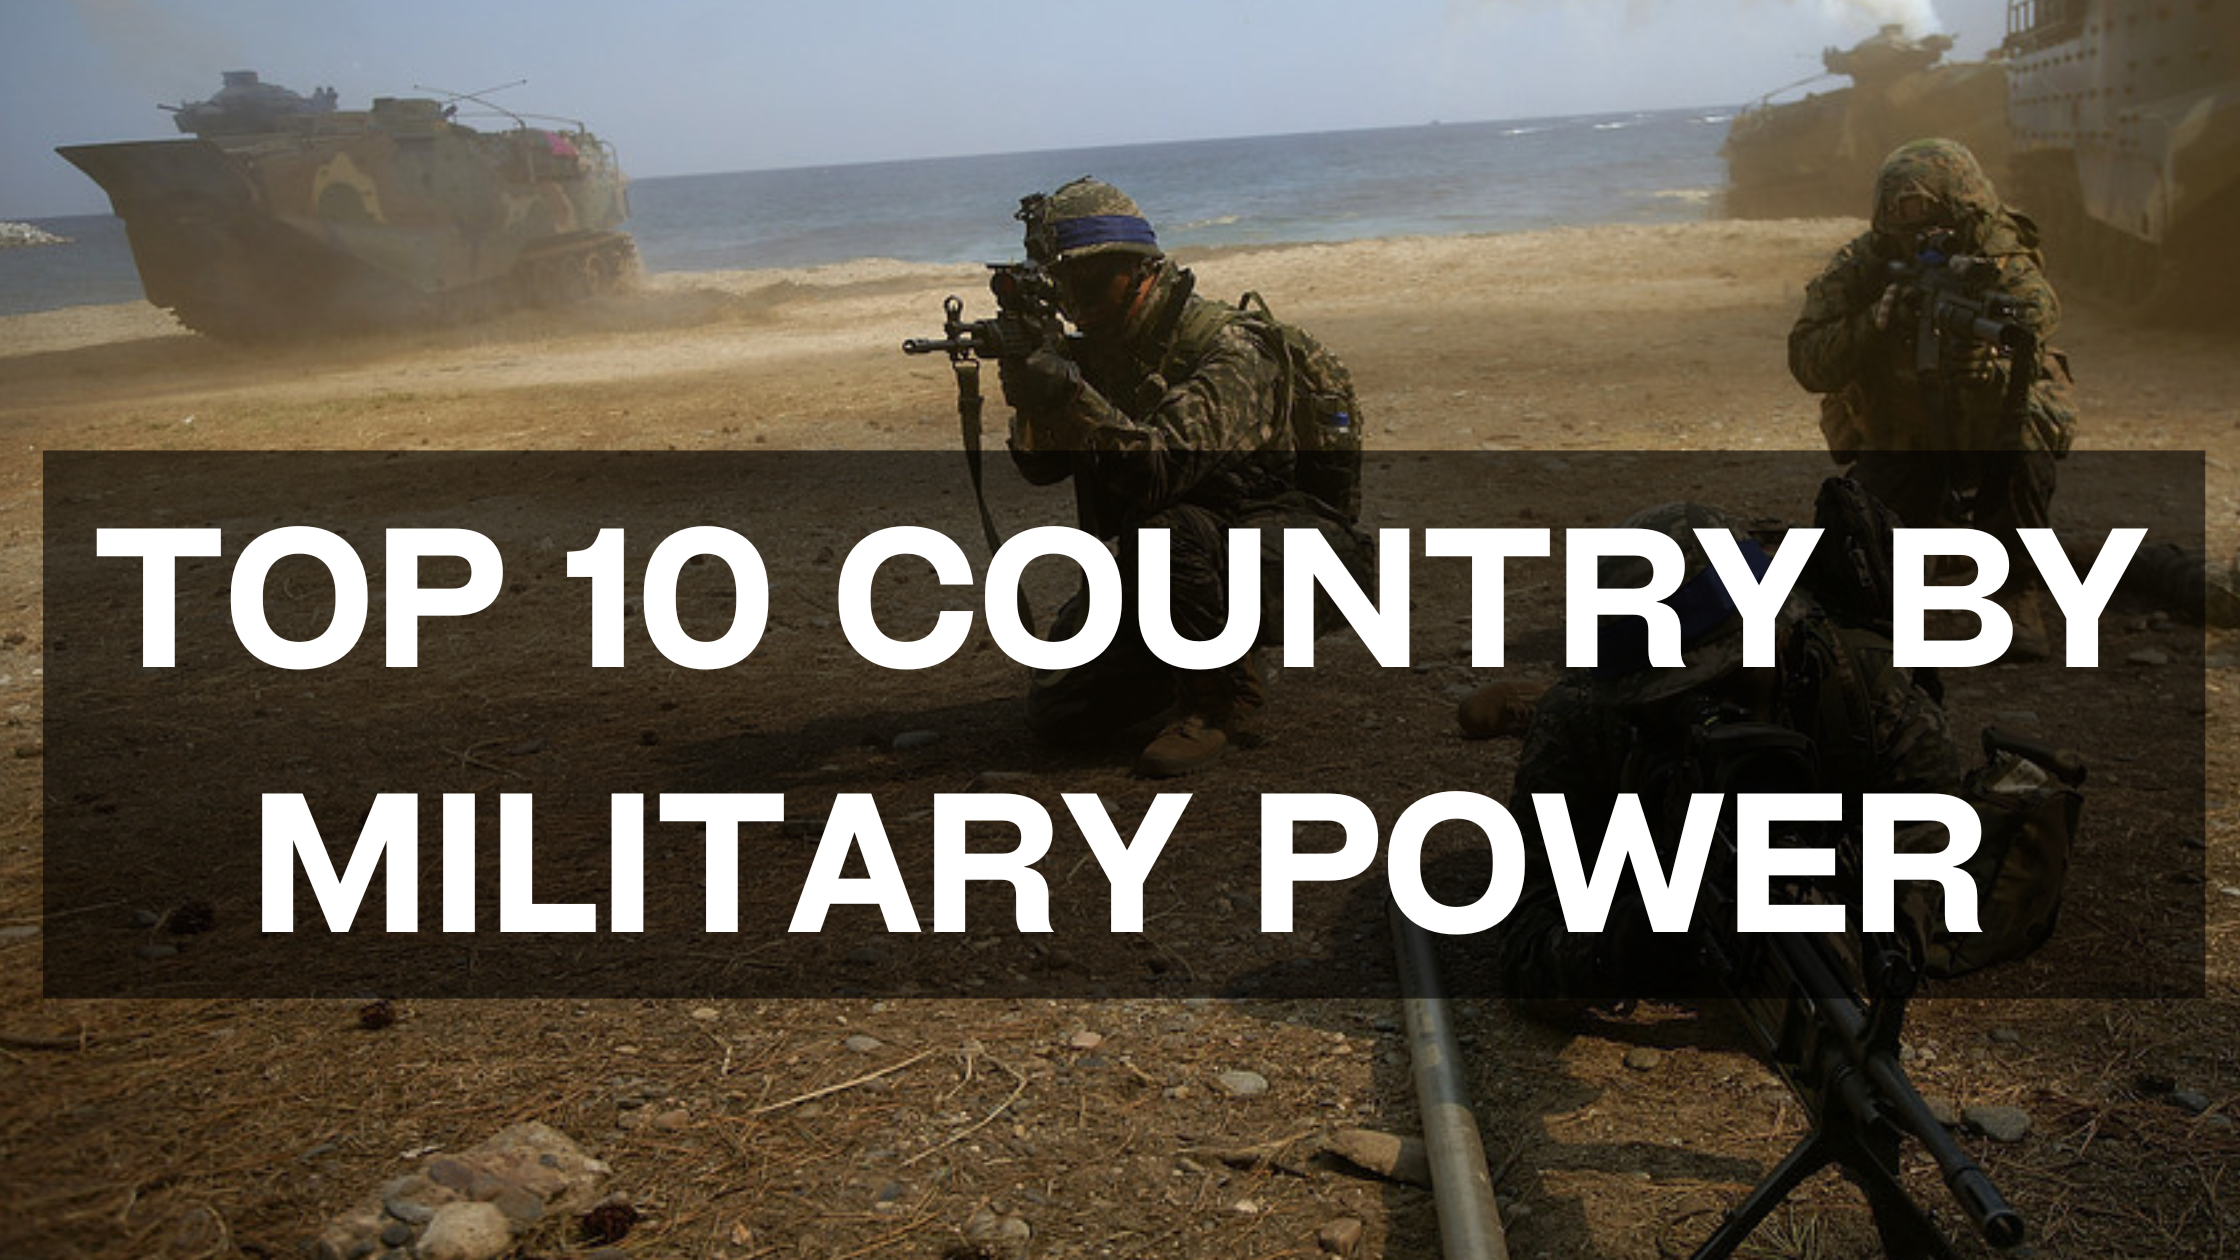 Top 10 Country by Military Power 2022